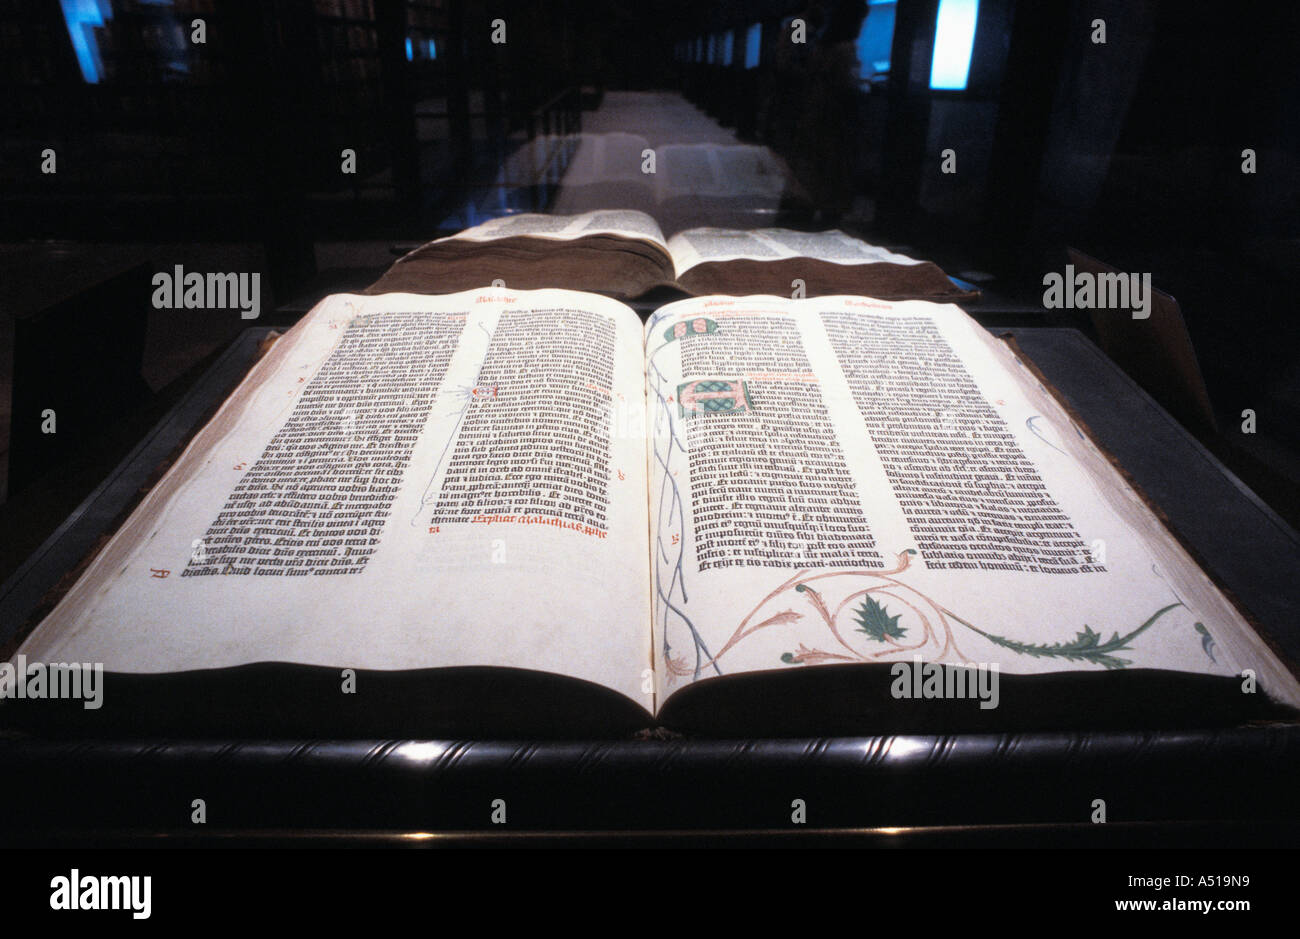 Gutenberg Bible in the Beinecke Rare Book and Manuscript Library Yale University New Haven CT USA Stock Photo